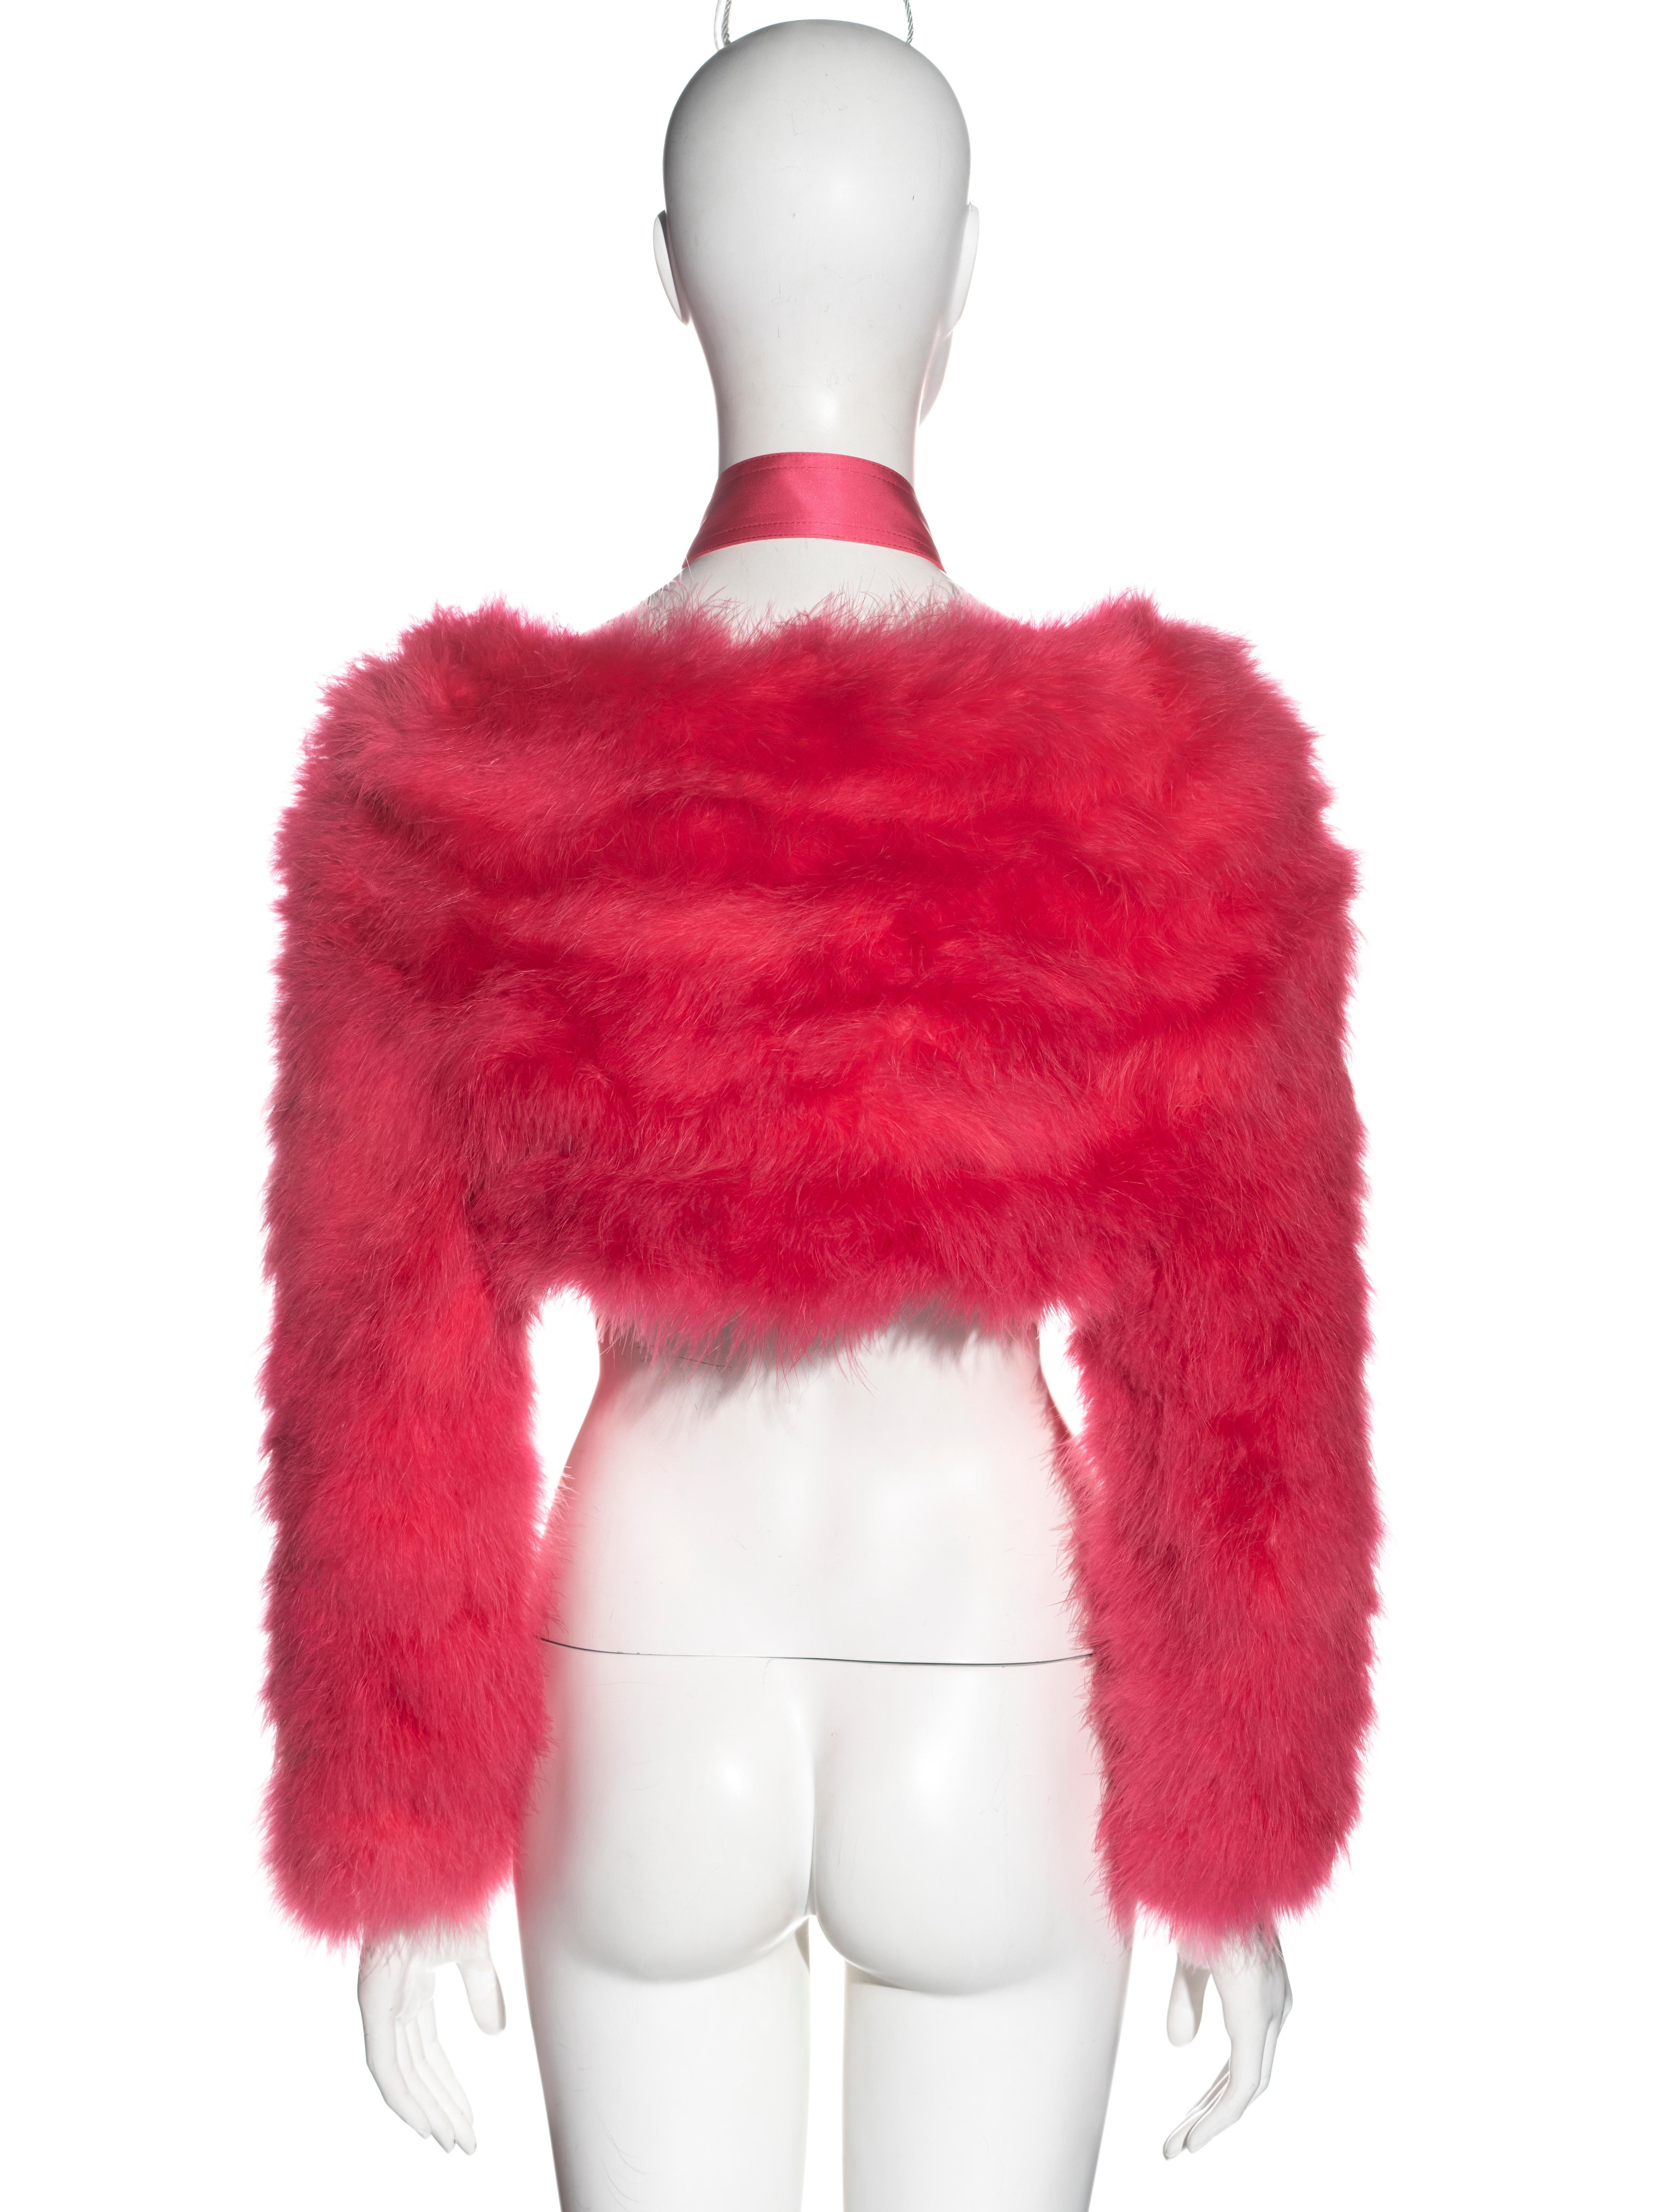 Women's Gucci by Tom Ford pink marabou feather bolero jacket, ss 2004